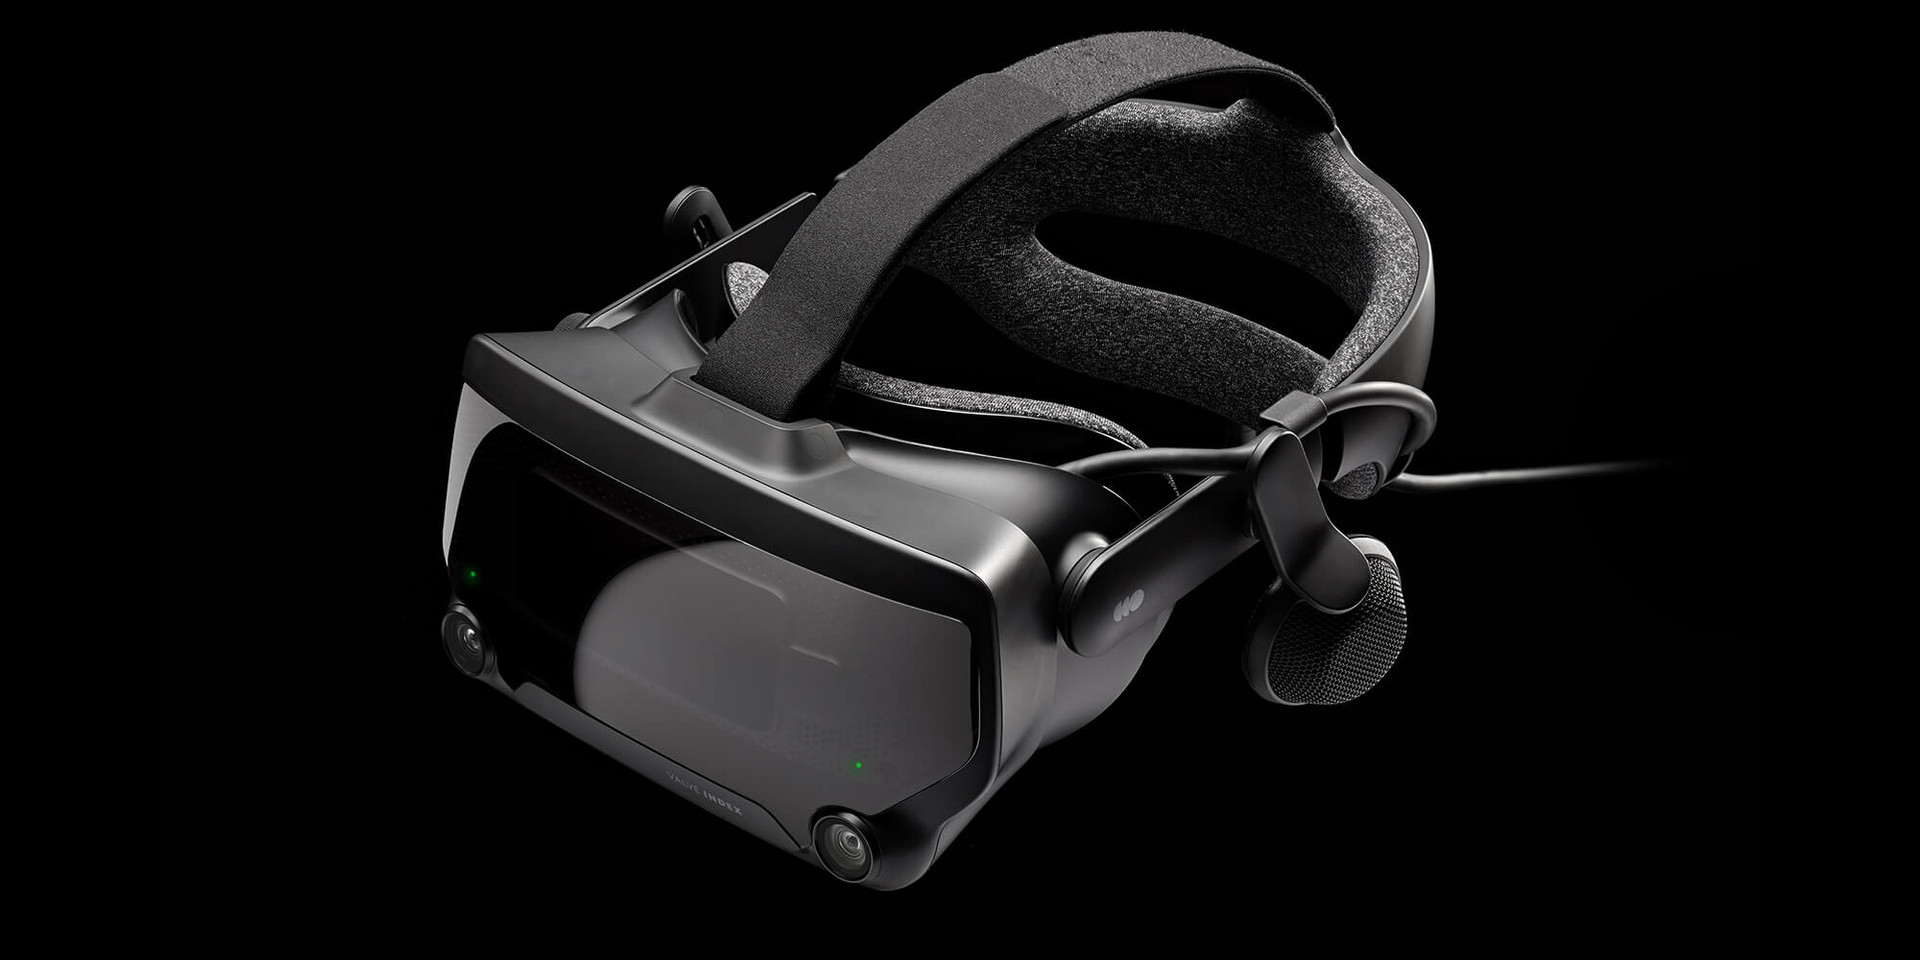 Valve Officially Launches the Valve Index VR HMD, Full Kit Preorder Up